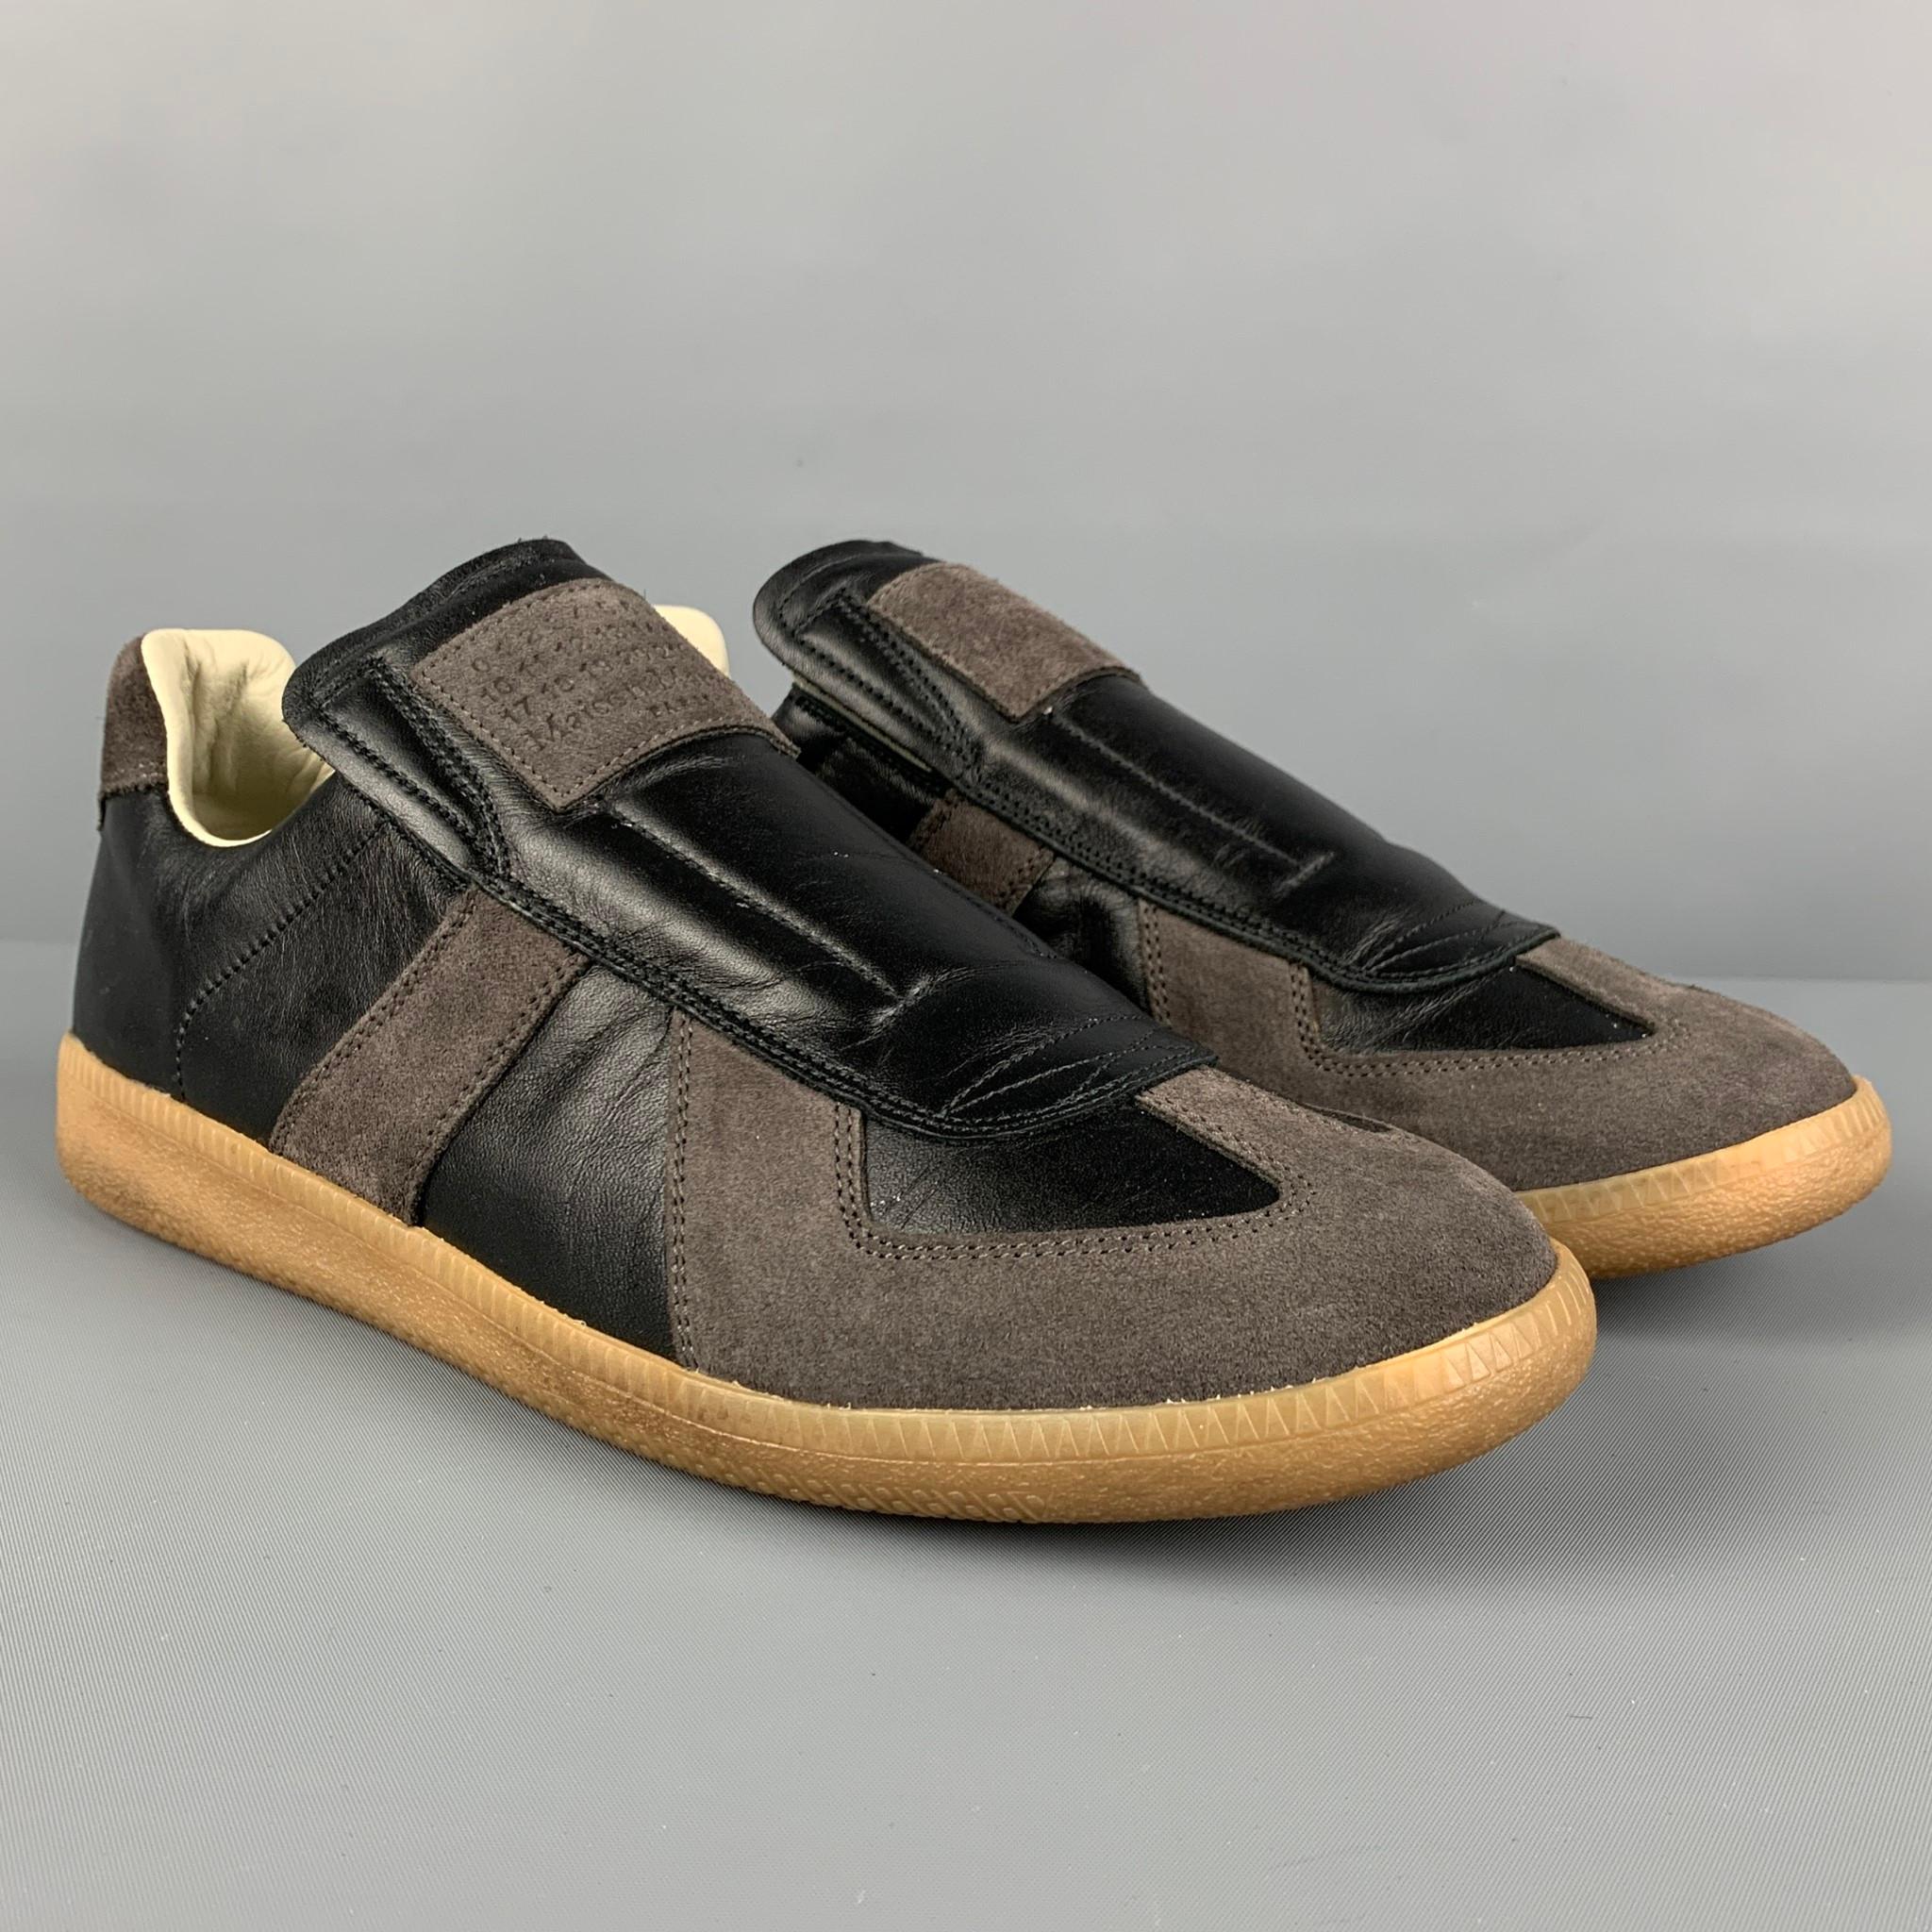 MAISON MARTIN MARGIELA 'Replica' sneakers comes in a black & grey color block leather featuring a slip on and a rubber sole. Made in Italy. 

Very Good Pre-Owned Condition.
Marked: 41

Outsole: 11 in. x 3.5 in. 